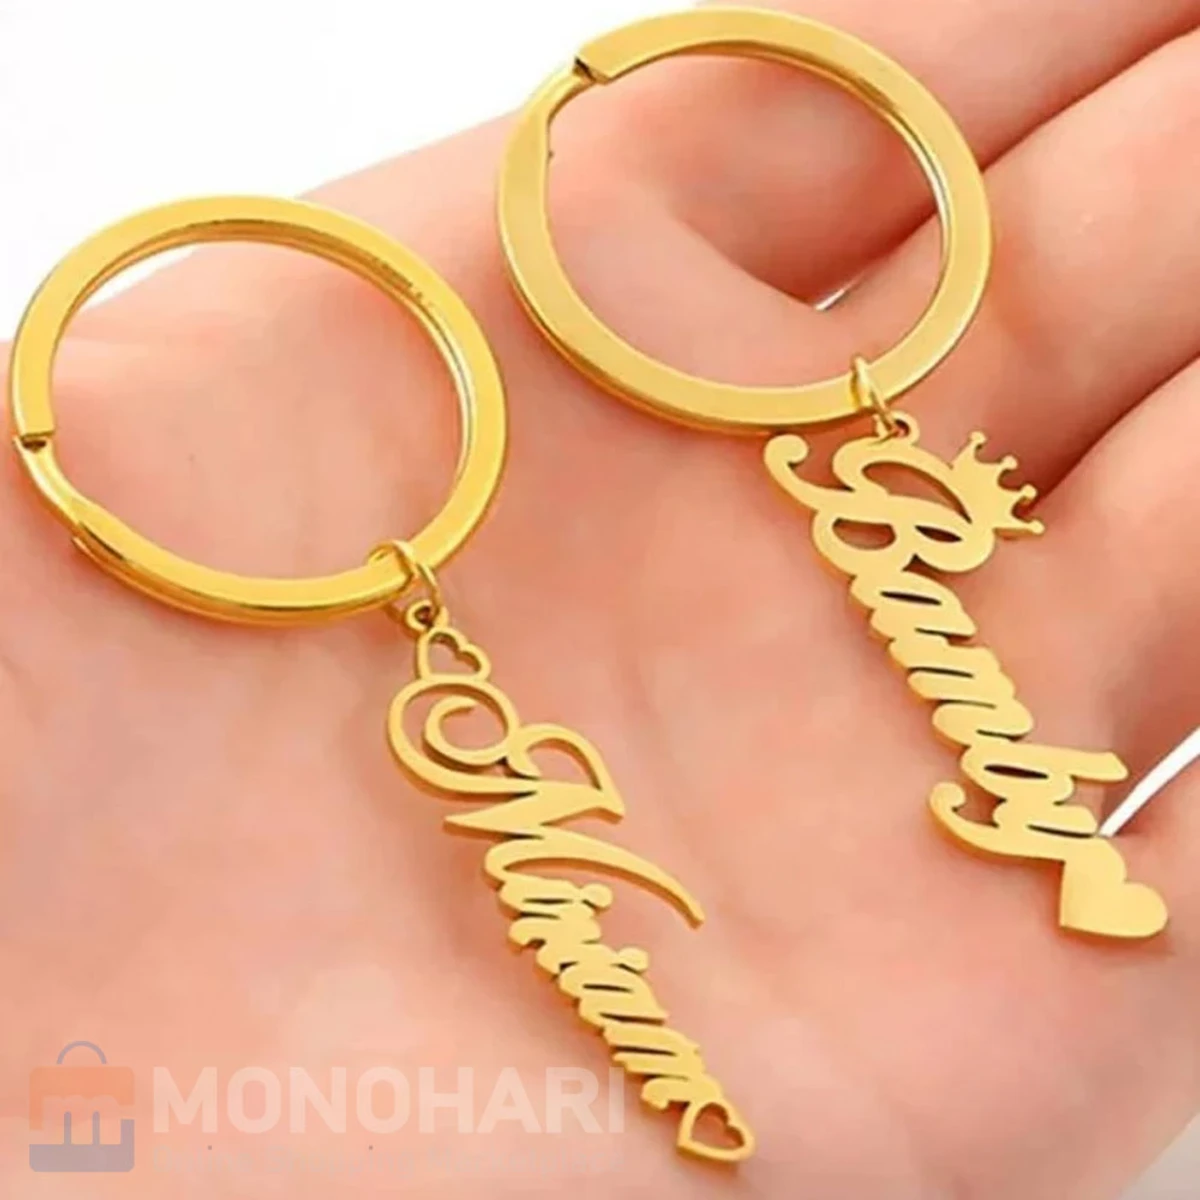 Single Name Key Ring (Bamby) With Left Heart Shape 22K Gold Plated Customized Key Ring